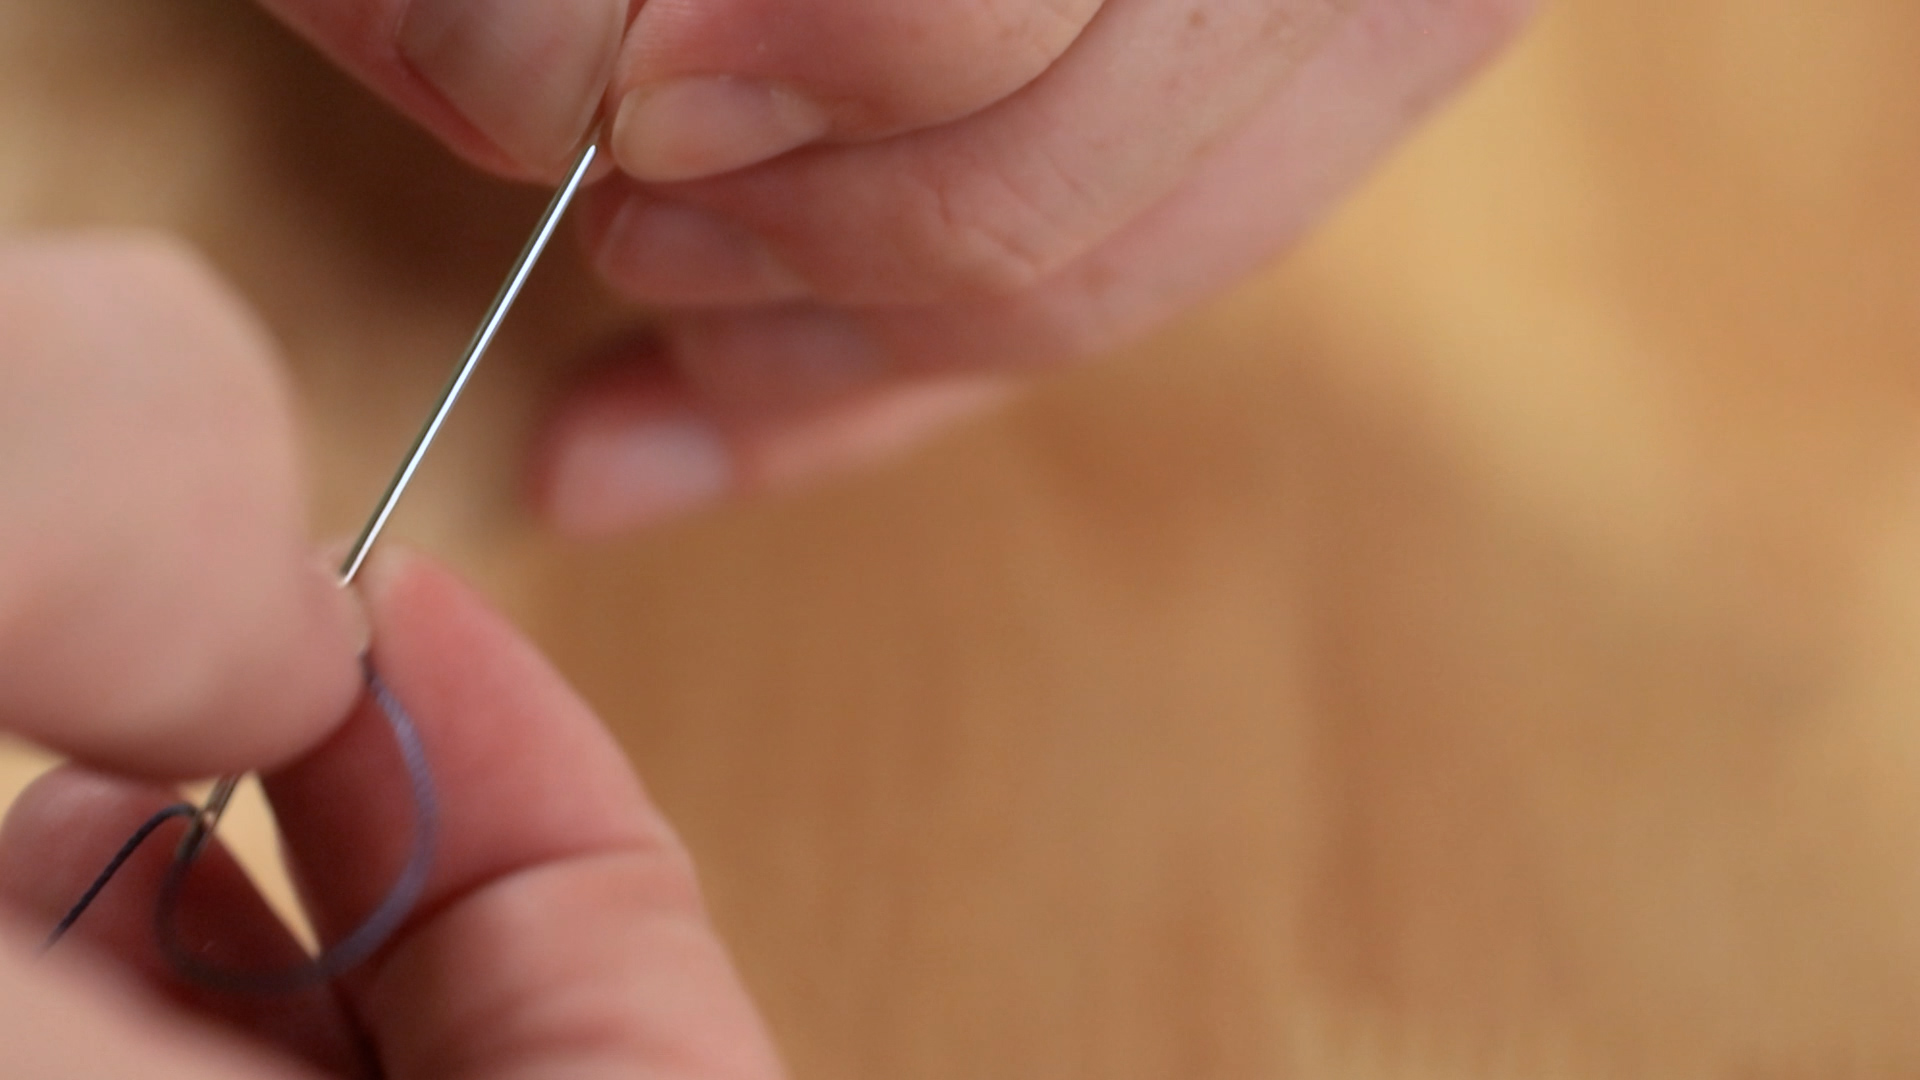 Tying thread to sewing needle